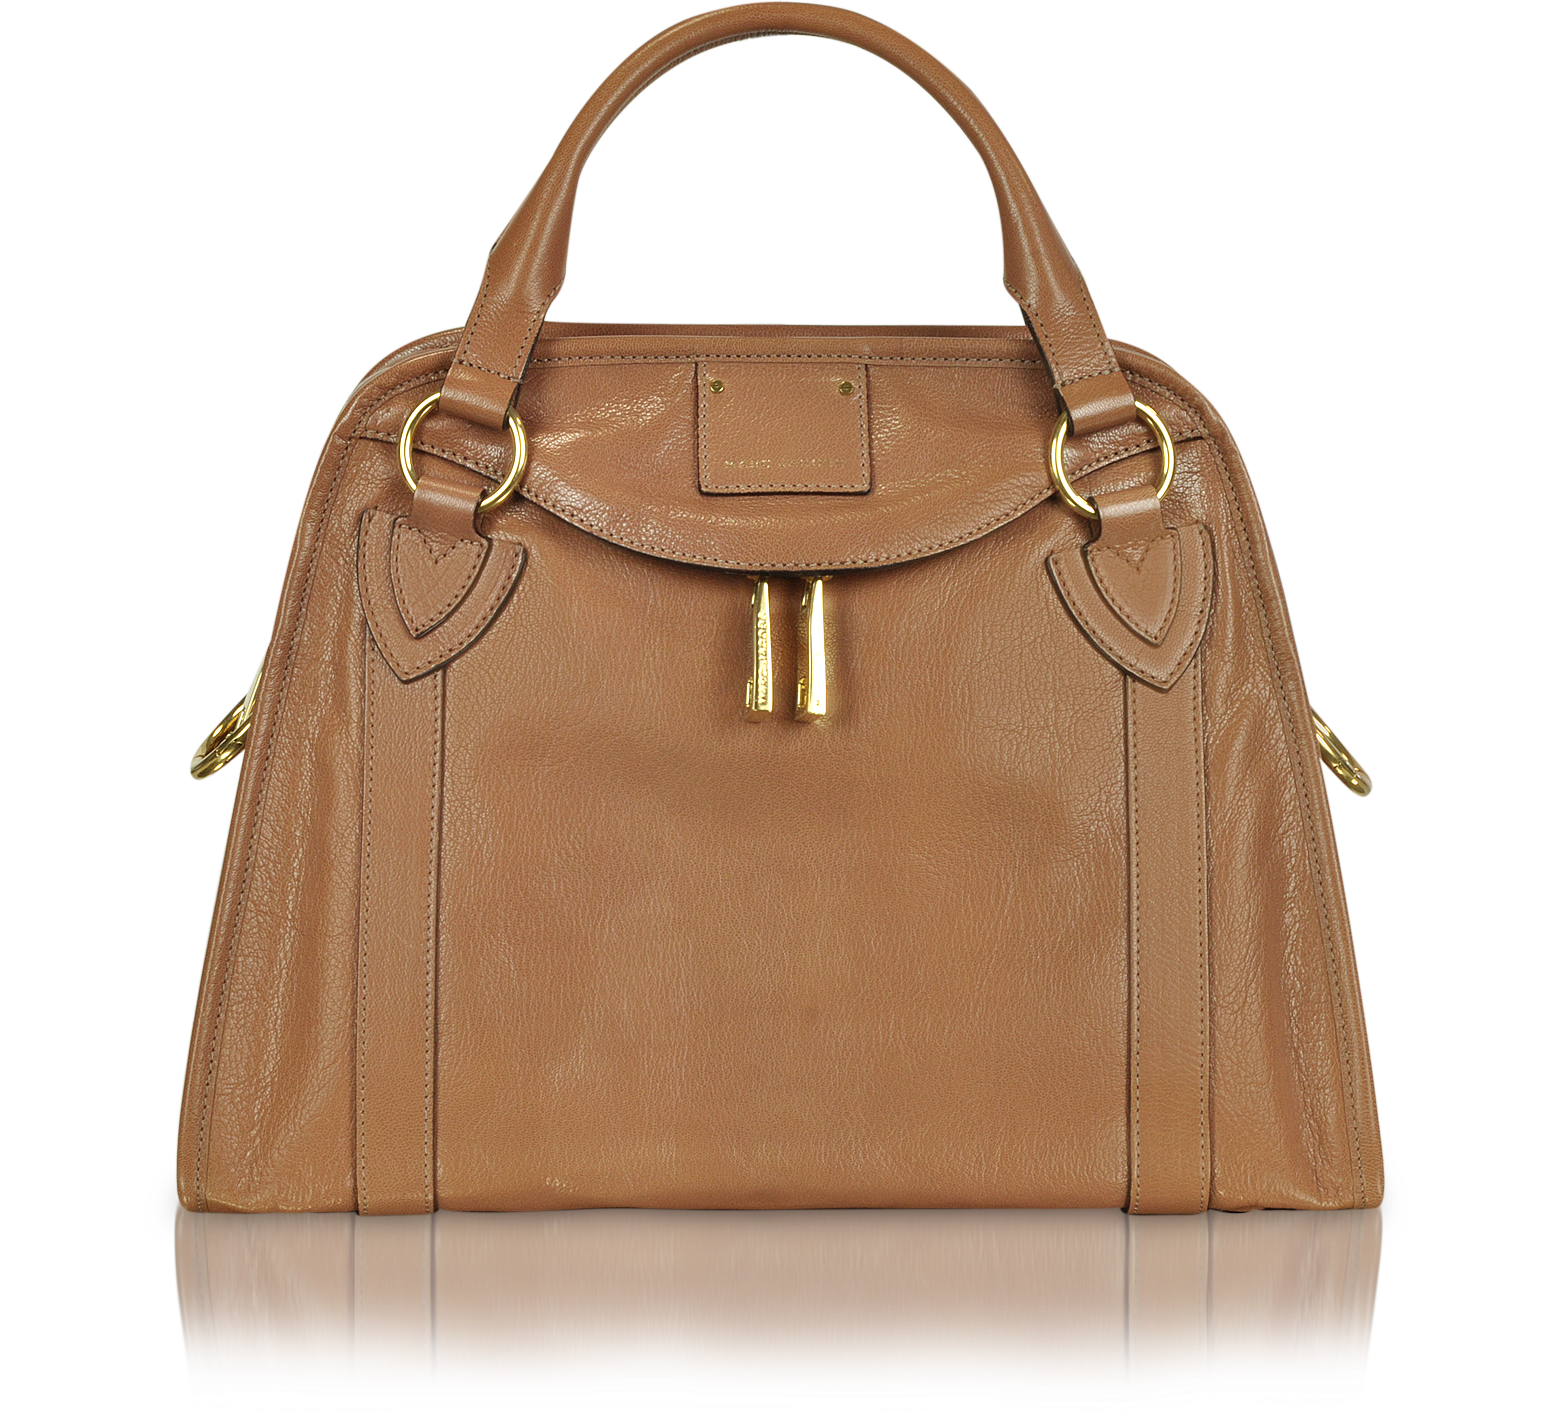 Marc Jacobs The Classic - Brown Leather Satchel Bag at FORZIERI Canada